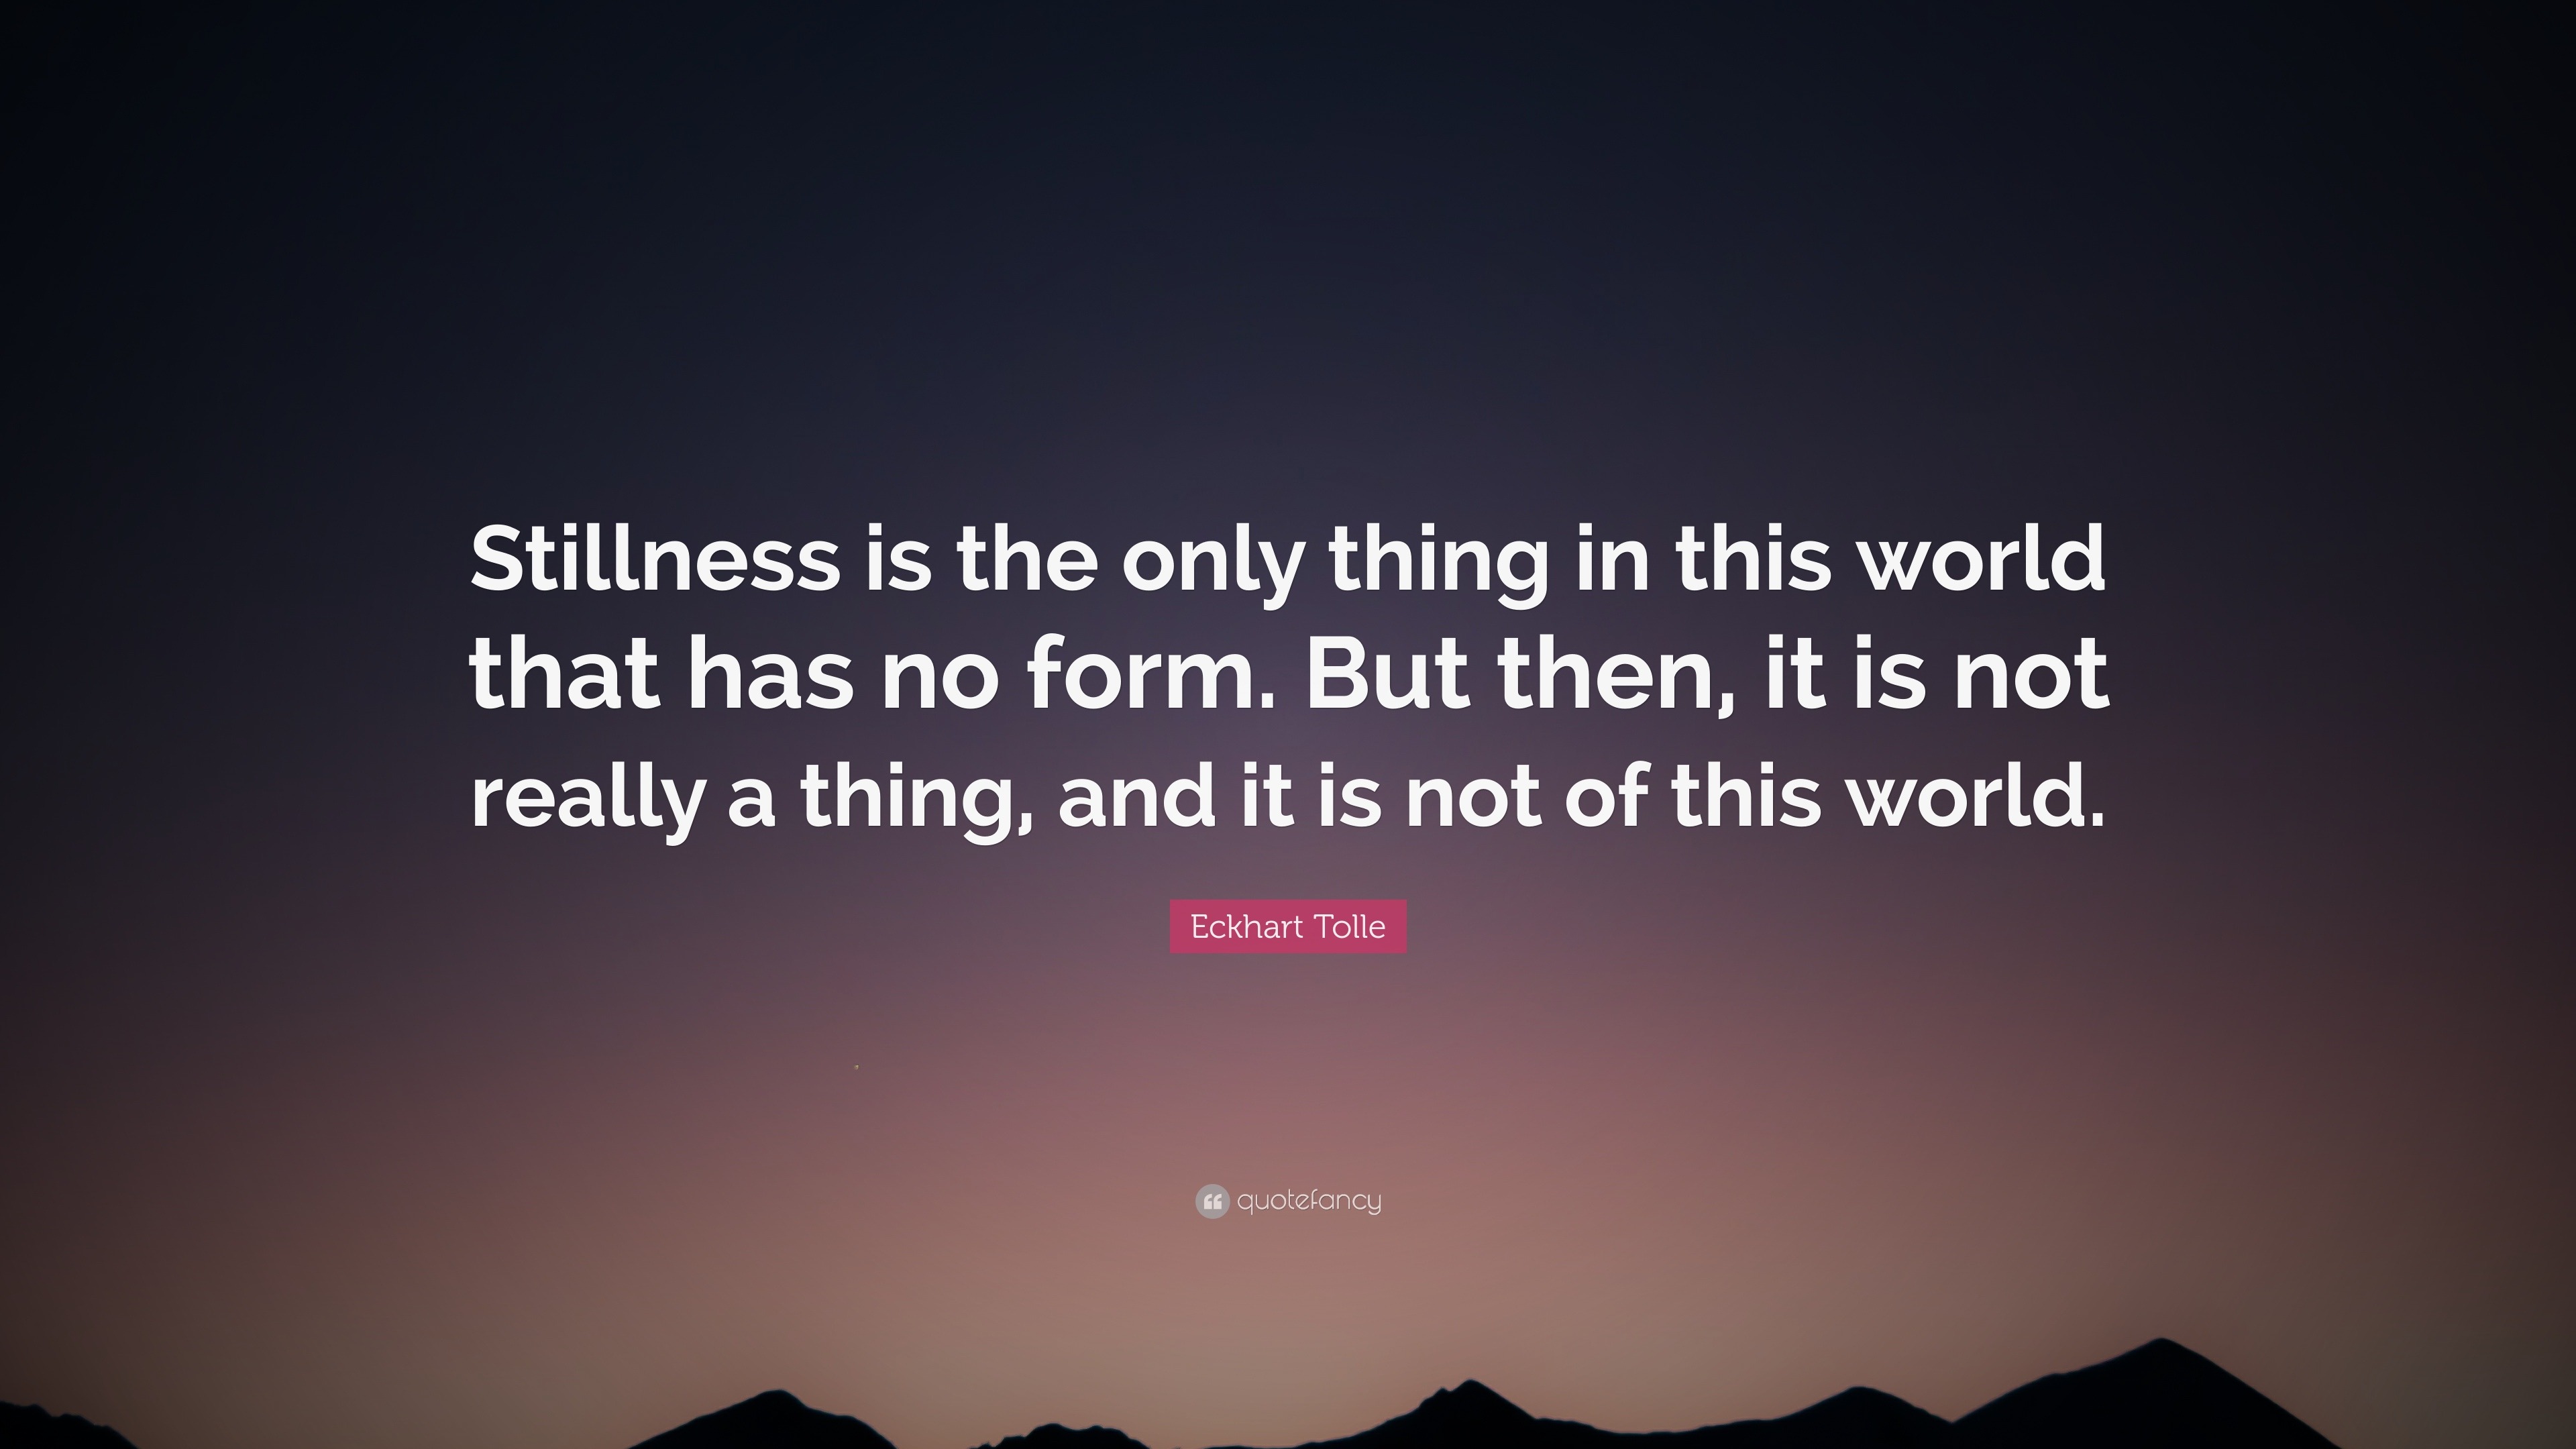 Eckhart Tolle Quote: “Stillness is the only thing in this world that ...